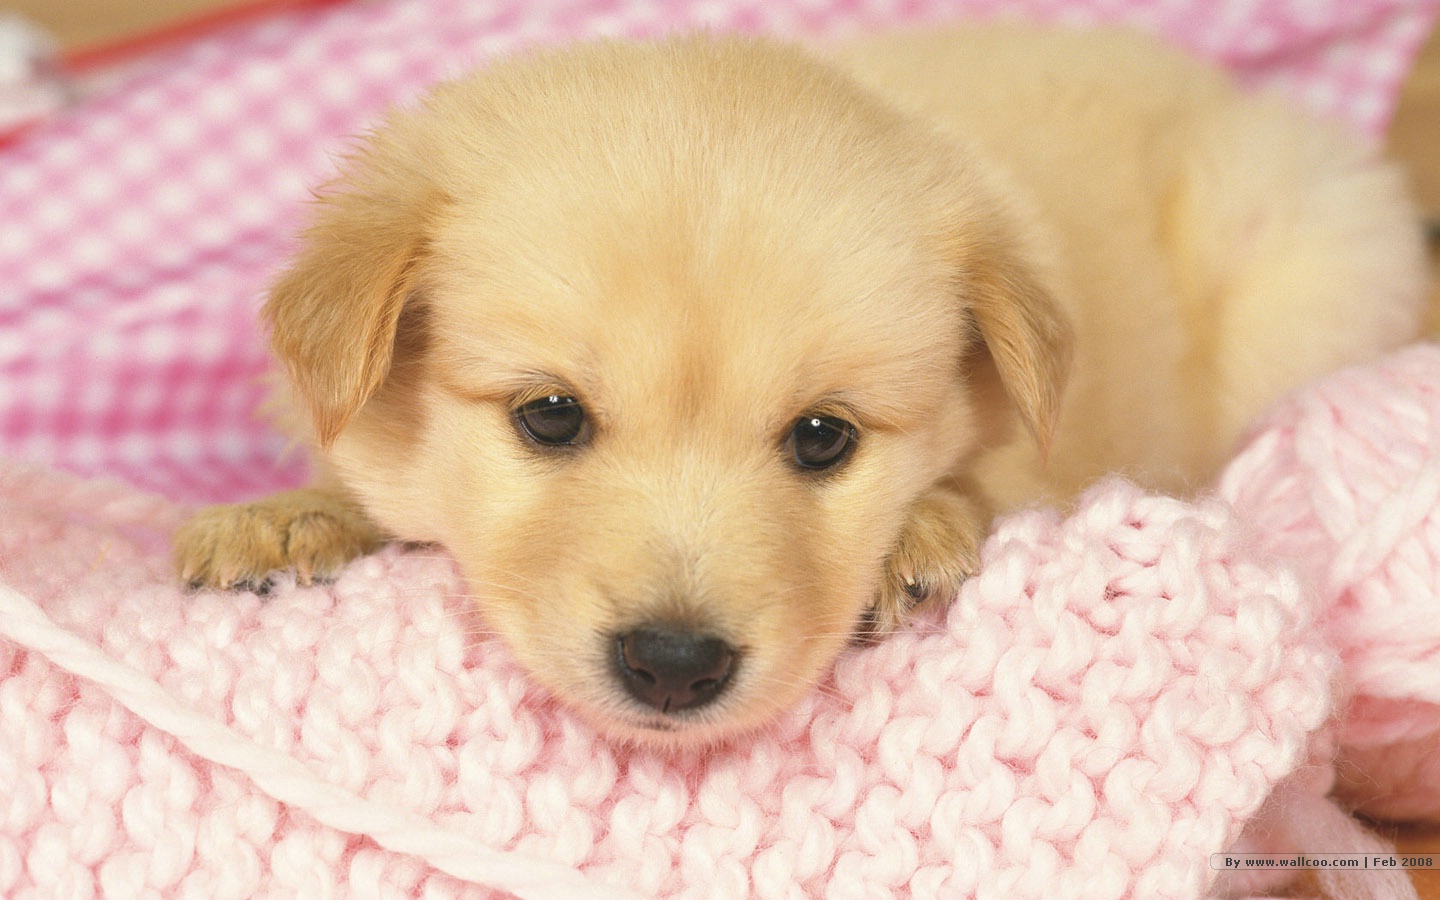  Puppy wallpapers Lovely Puppies Photos 1440900 NO52 Wallpaper